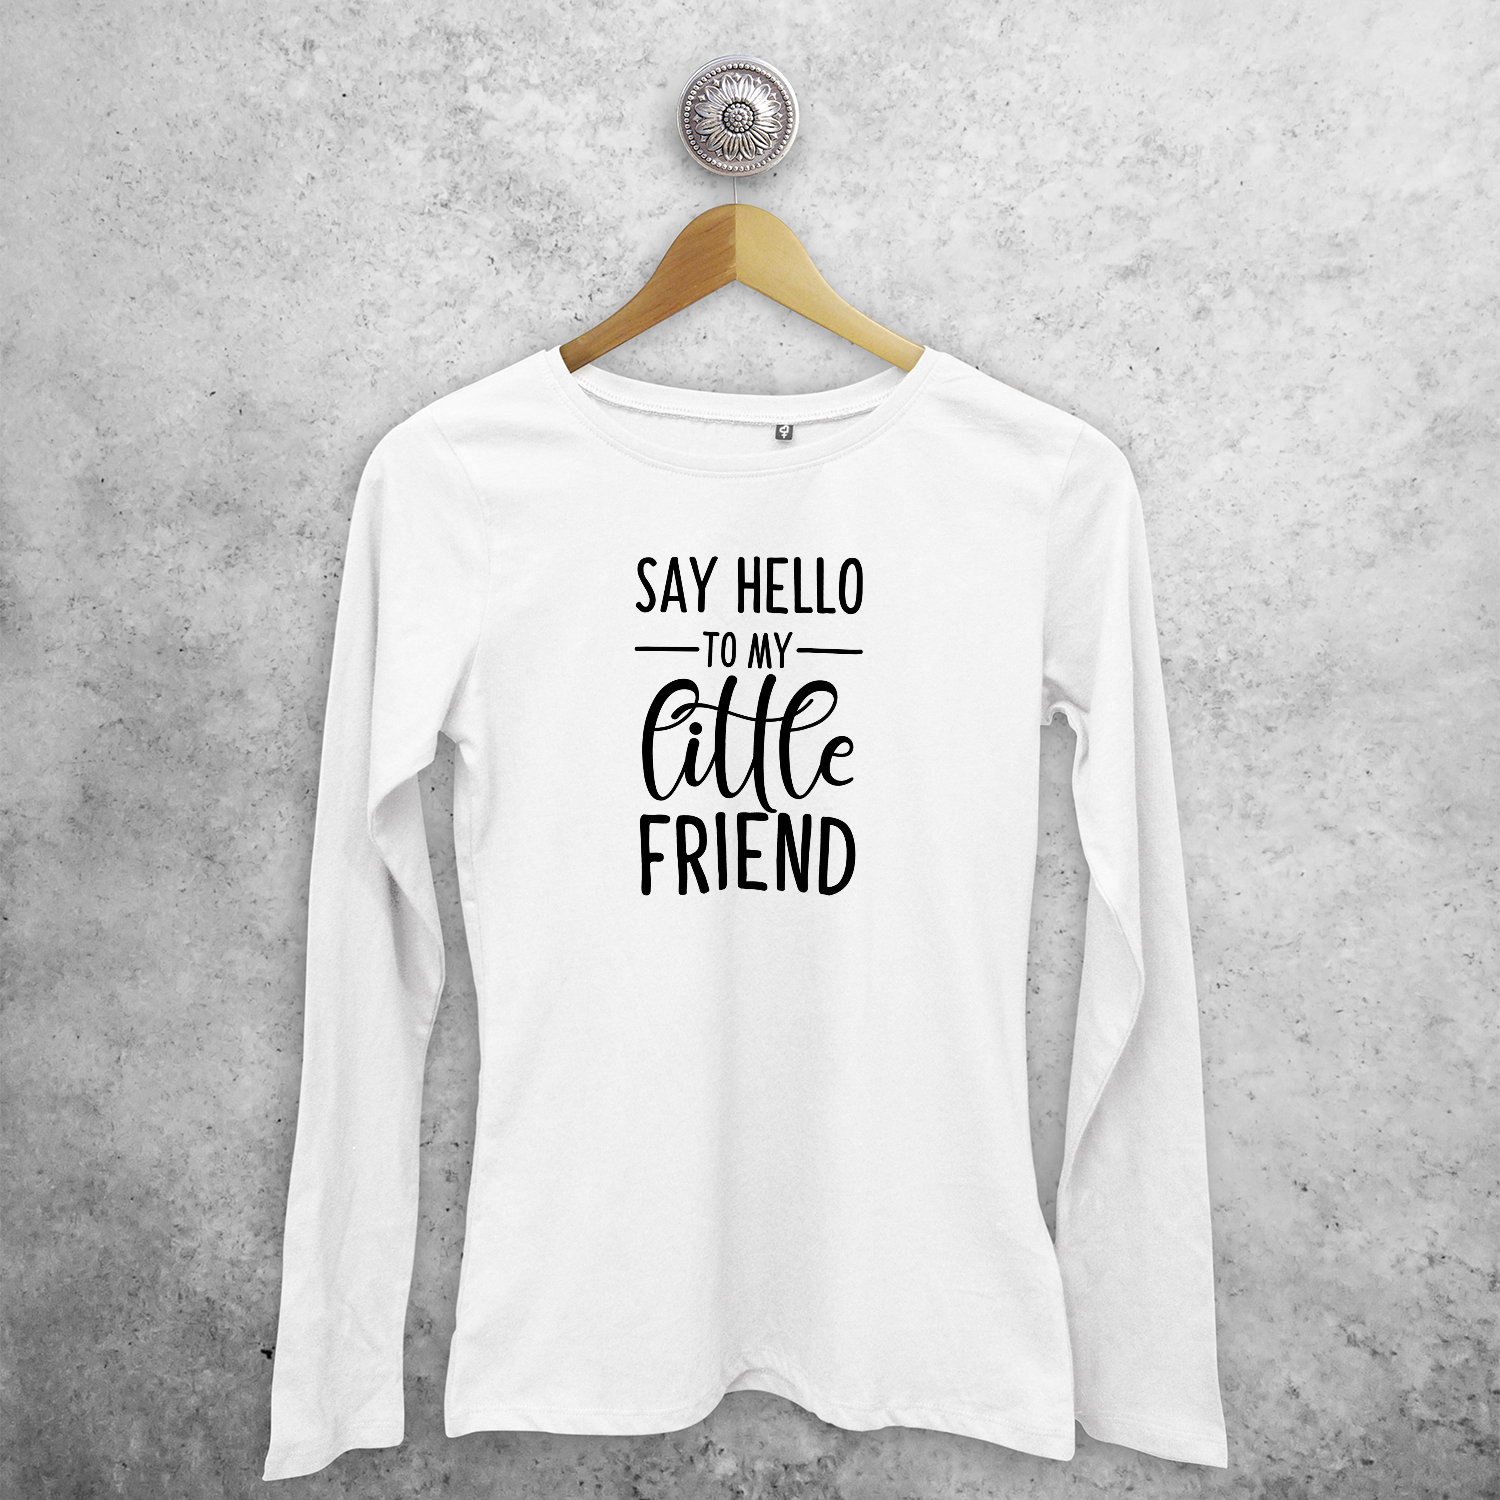 'Say hello to my little friend' adult longsleeve shirt